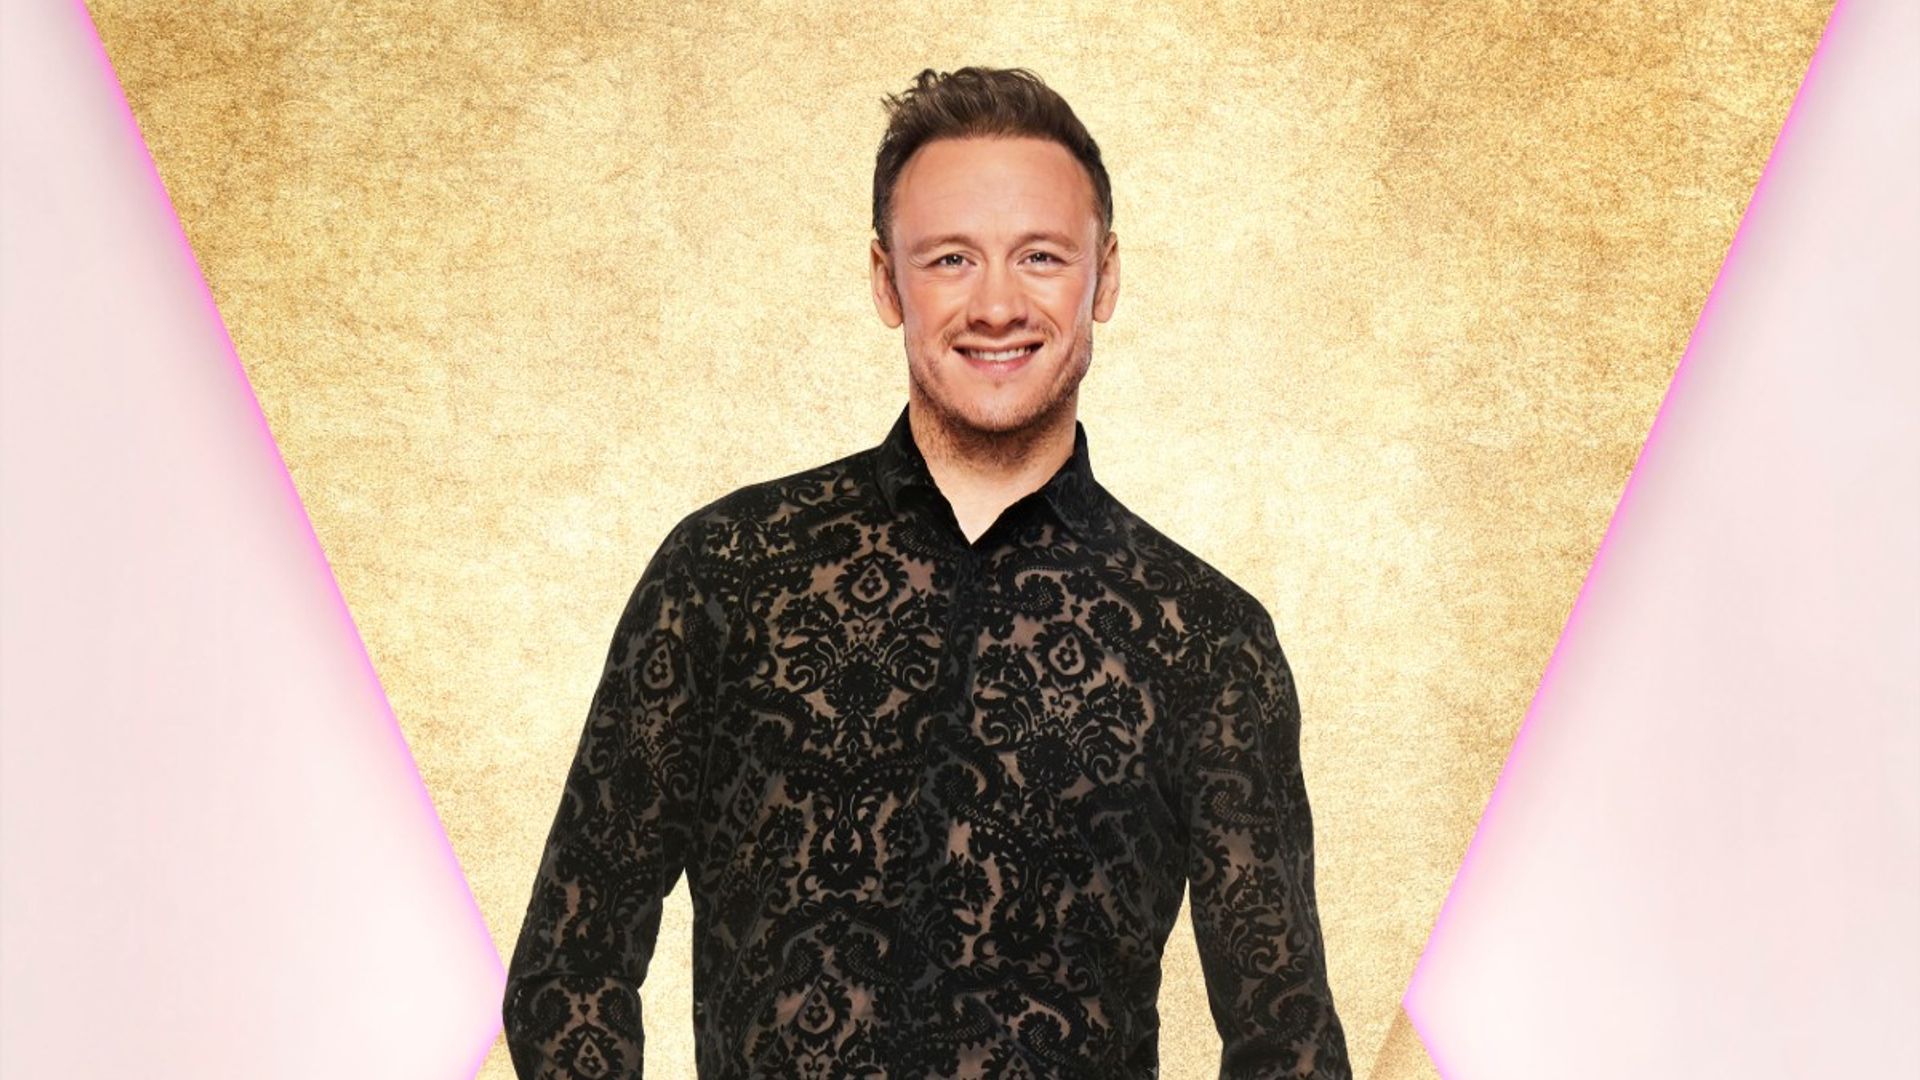 kevin clifton smiling